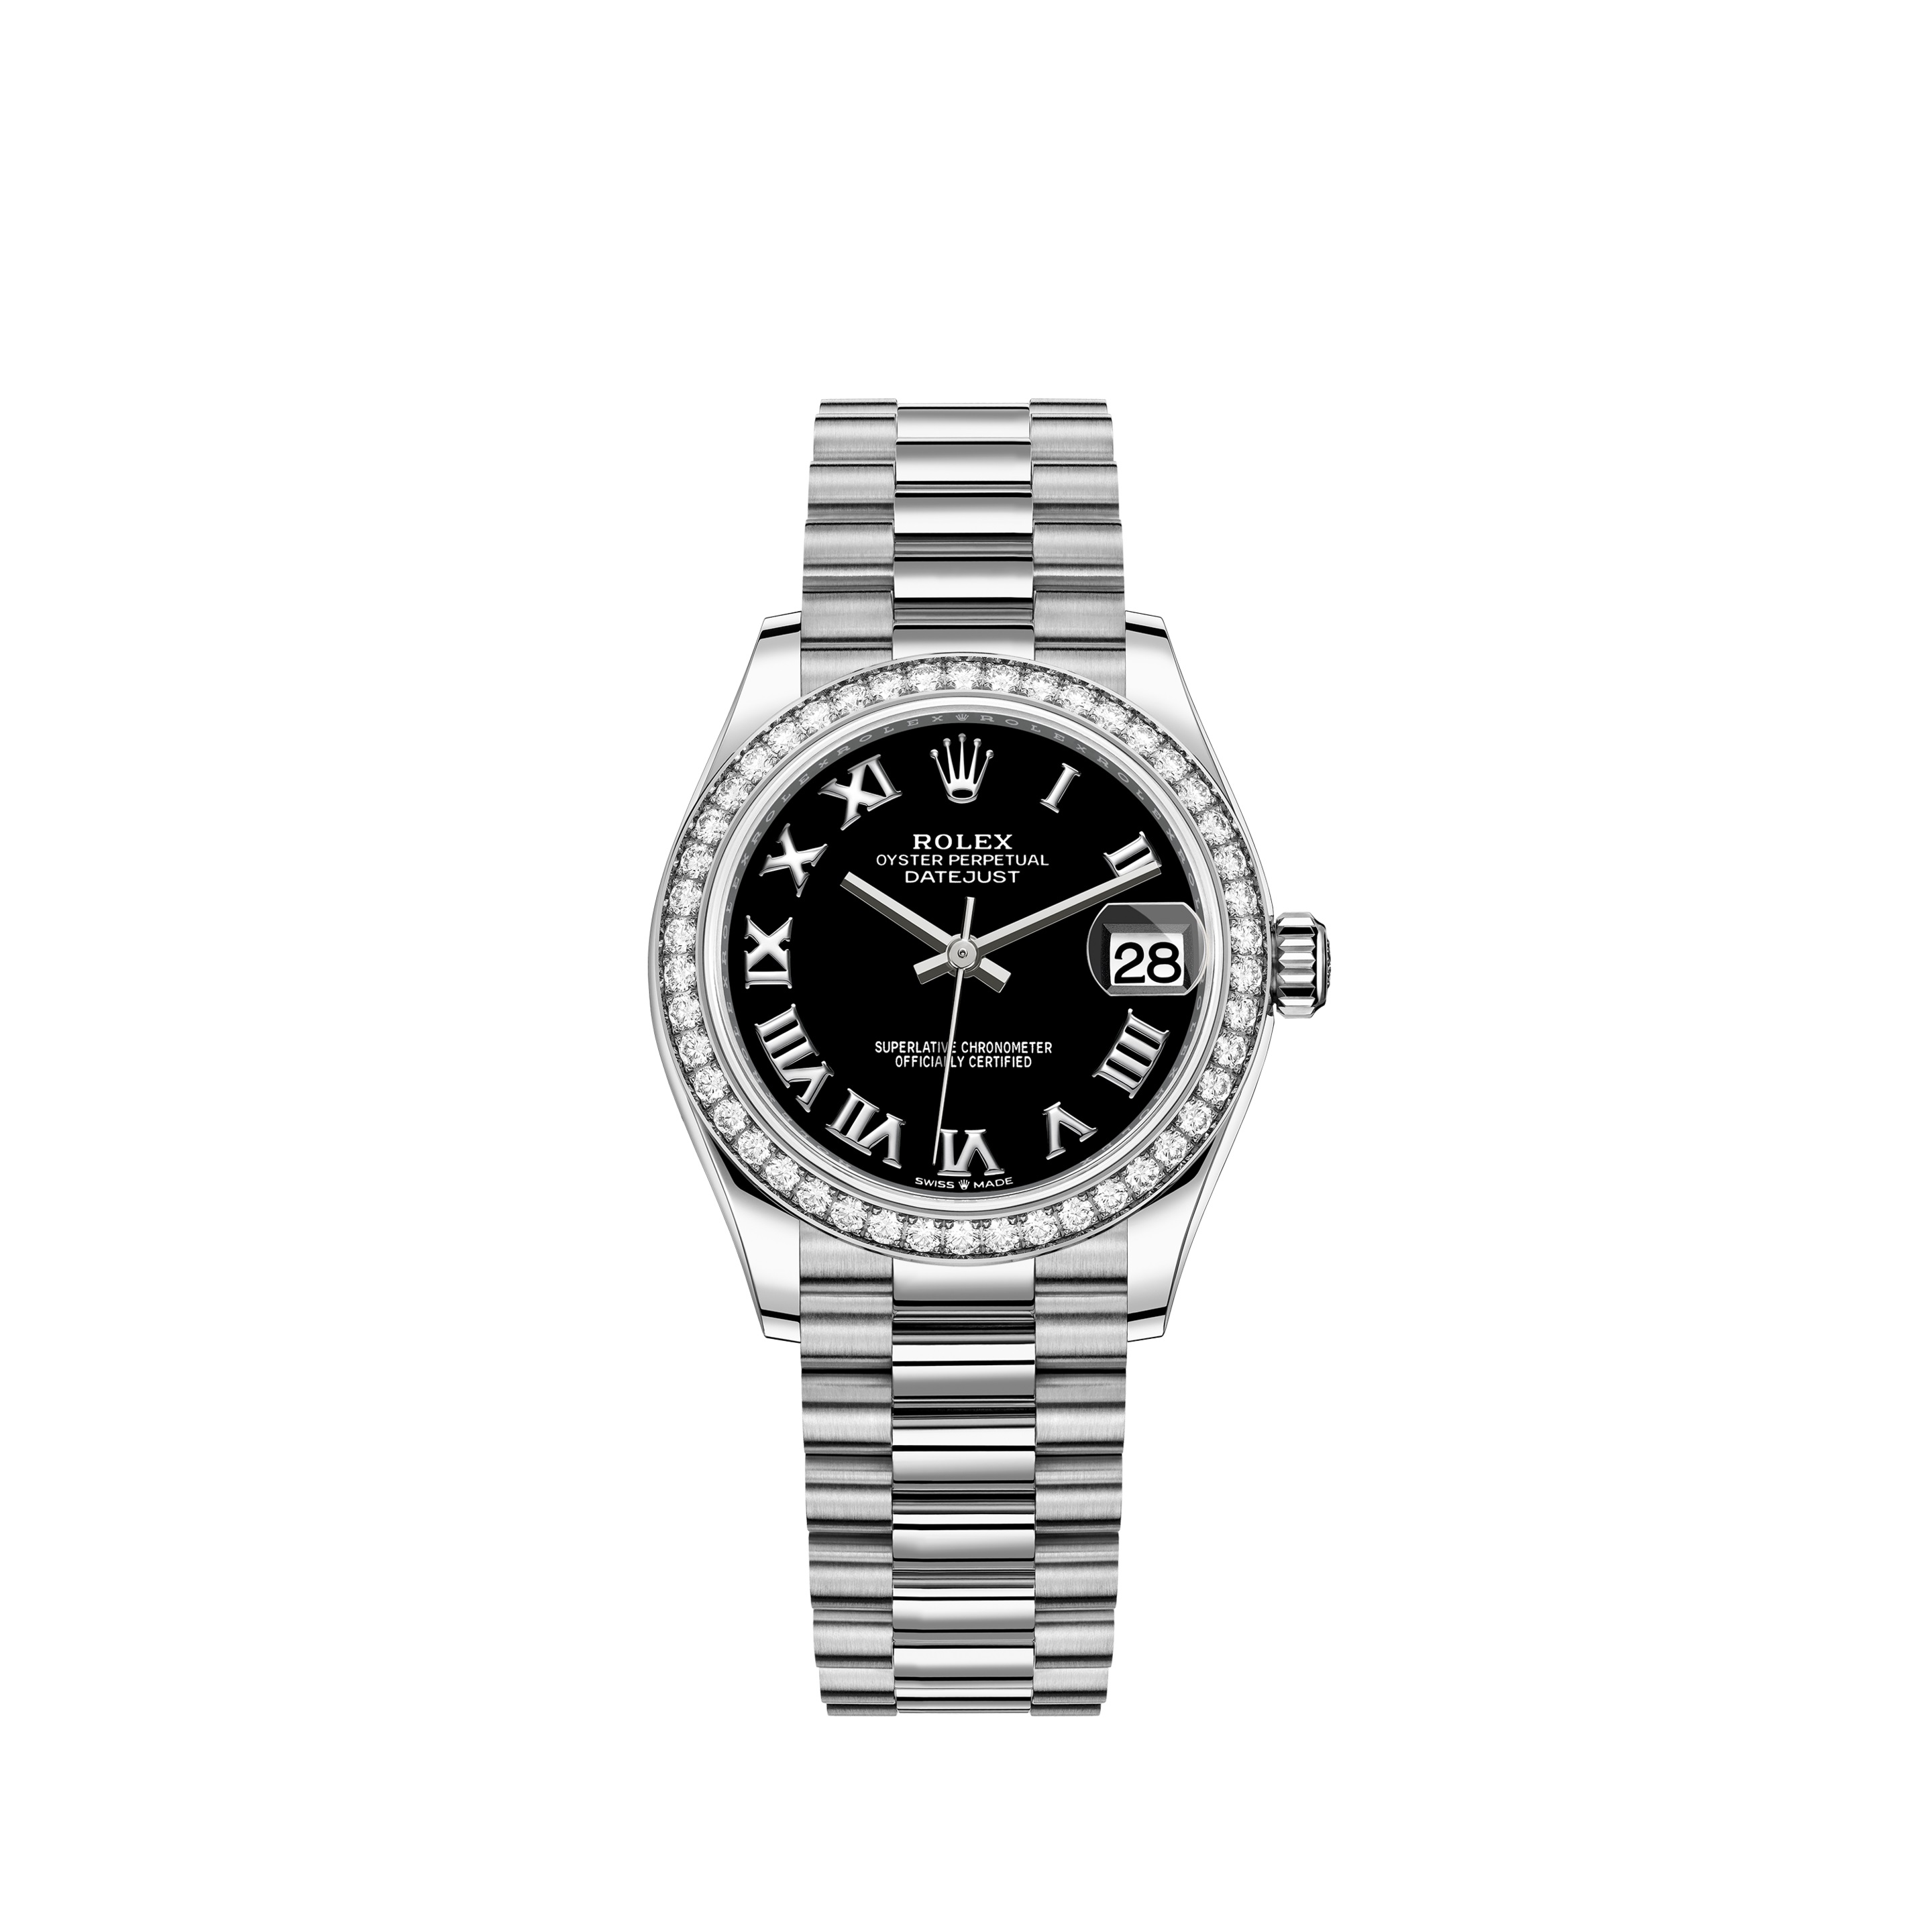 Datejust 31 278289RBR White Gold Watch (Bright Black) - Click Image to Close